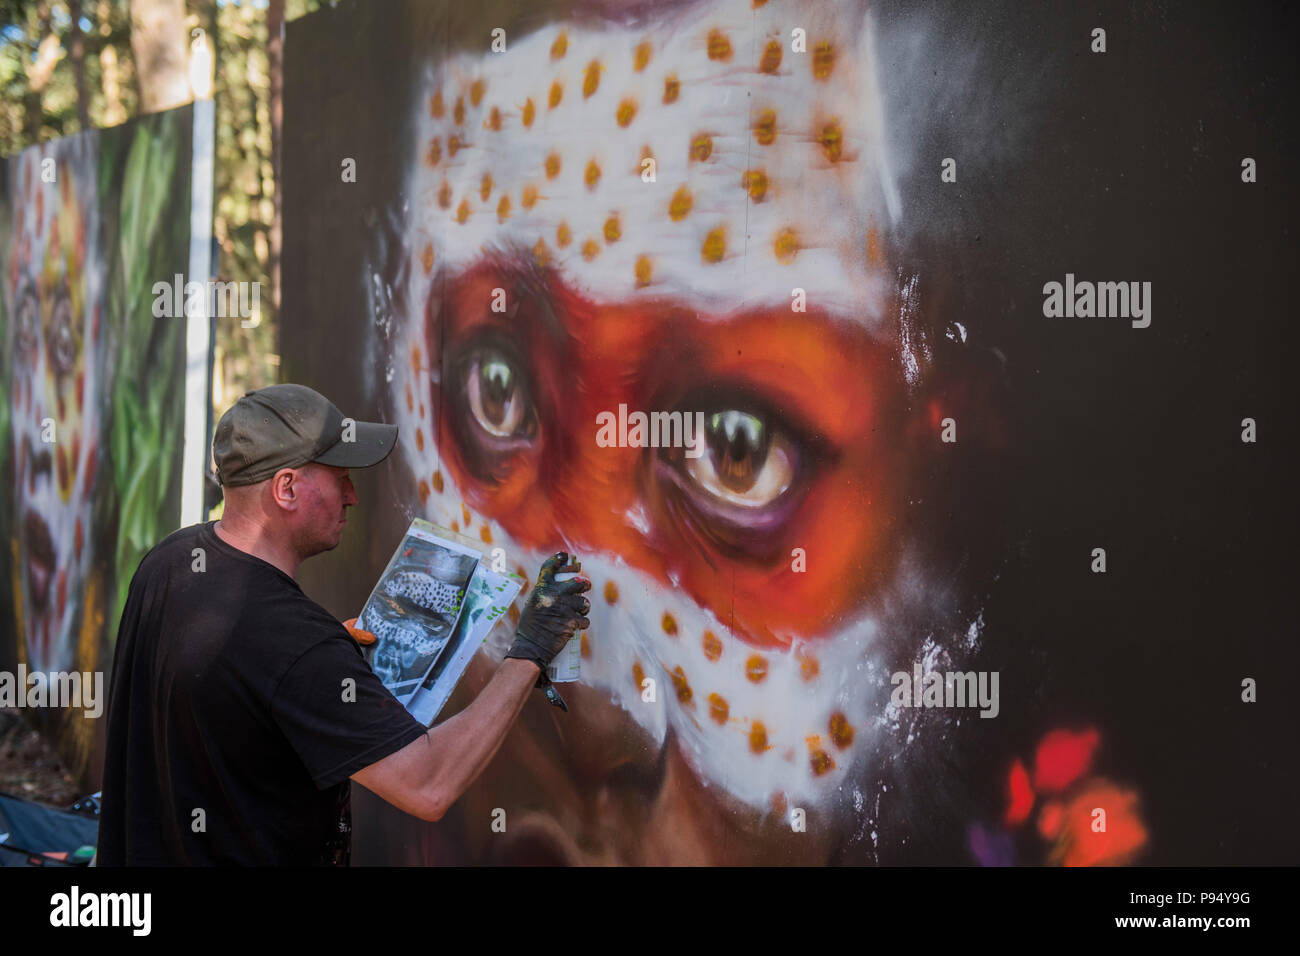 Suffolk, UK, 14 July 2018. Dale Grimshaw works on his art in the woods - The 2018 Latitude Festival, Henham Park. Suffolk 14 July 2018Credit: Guy Bell/Alamy Live News  Stock Photo